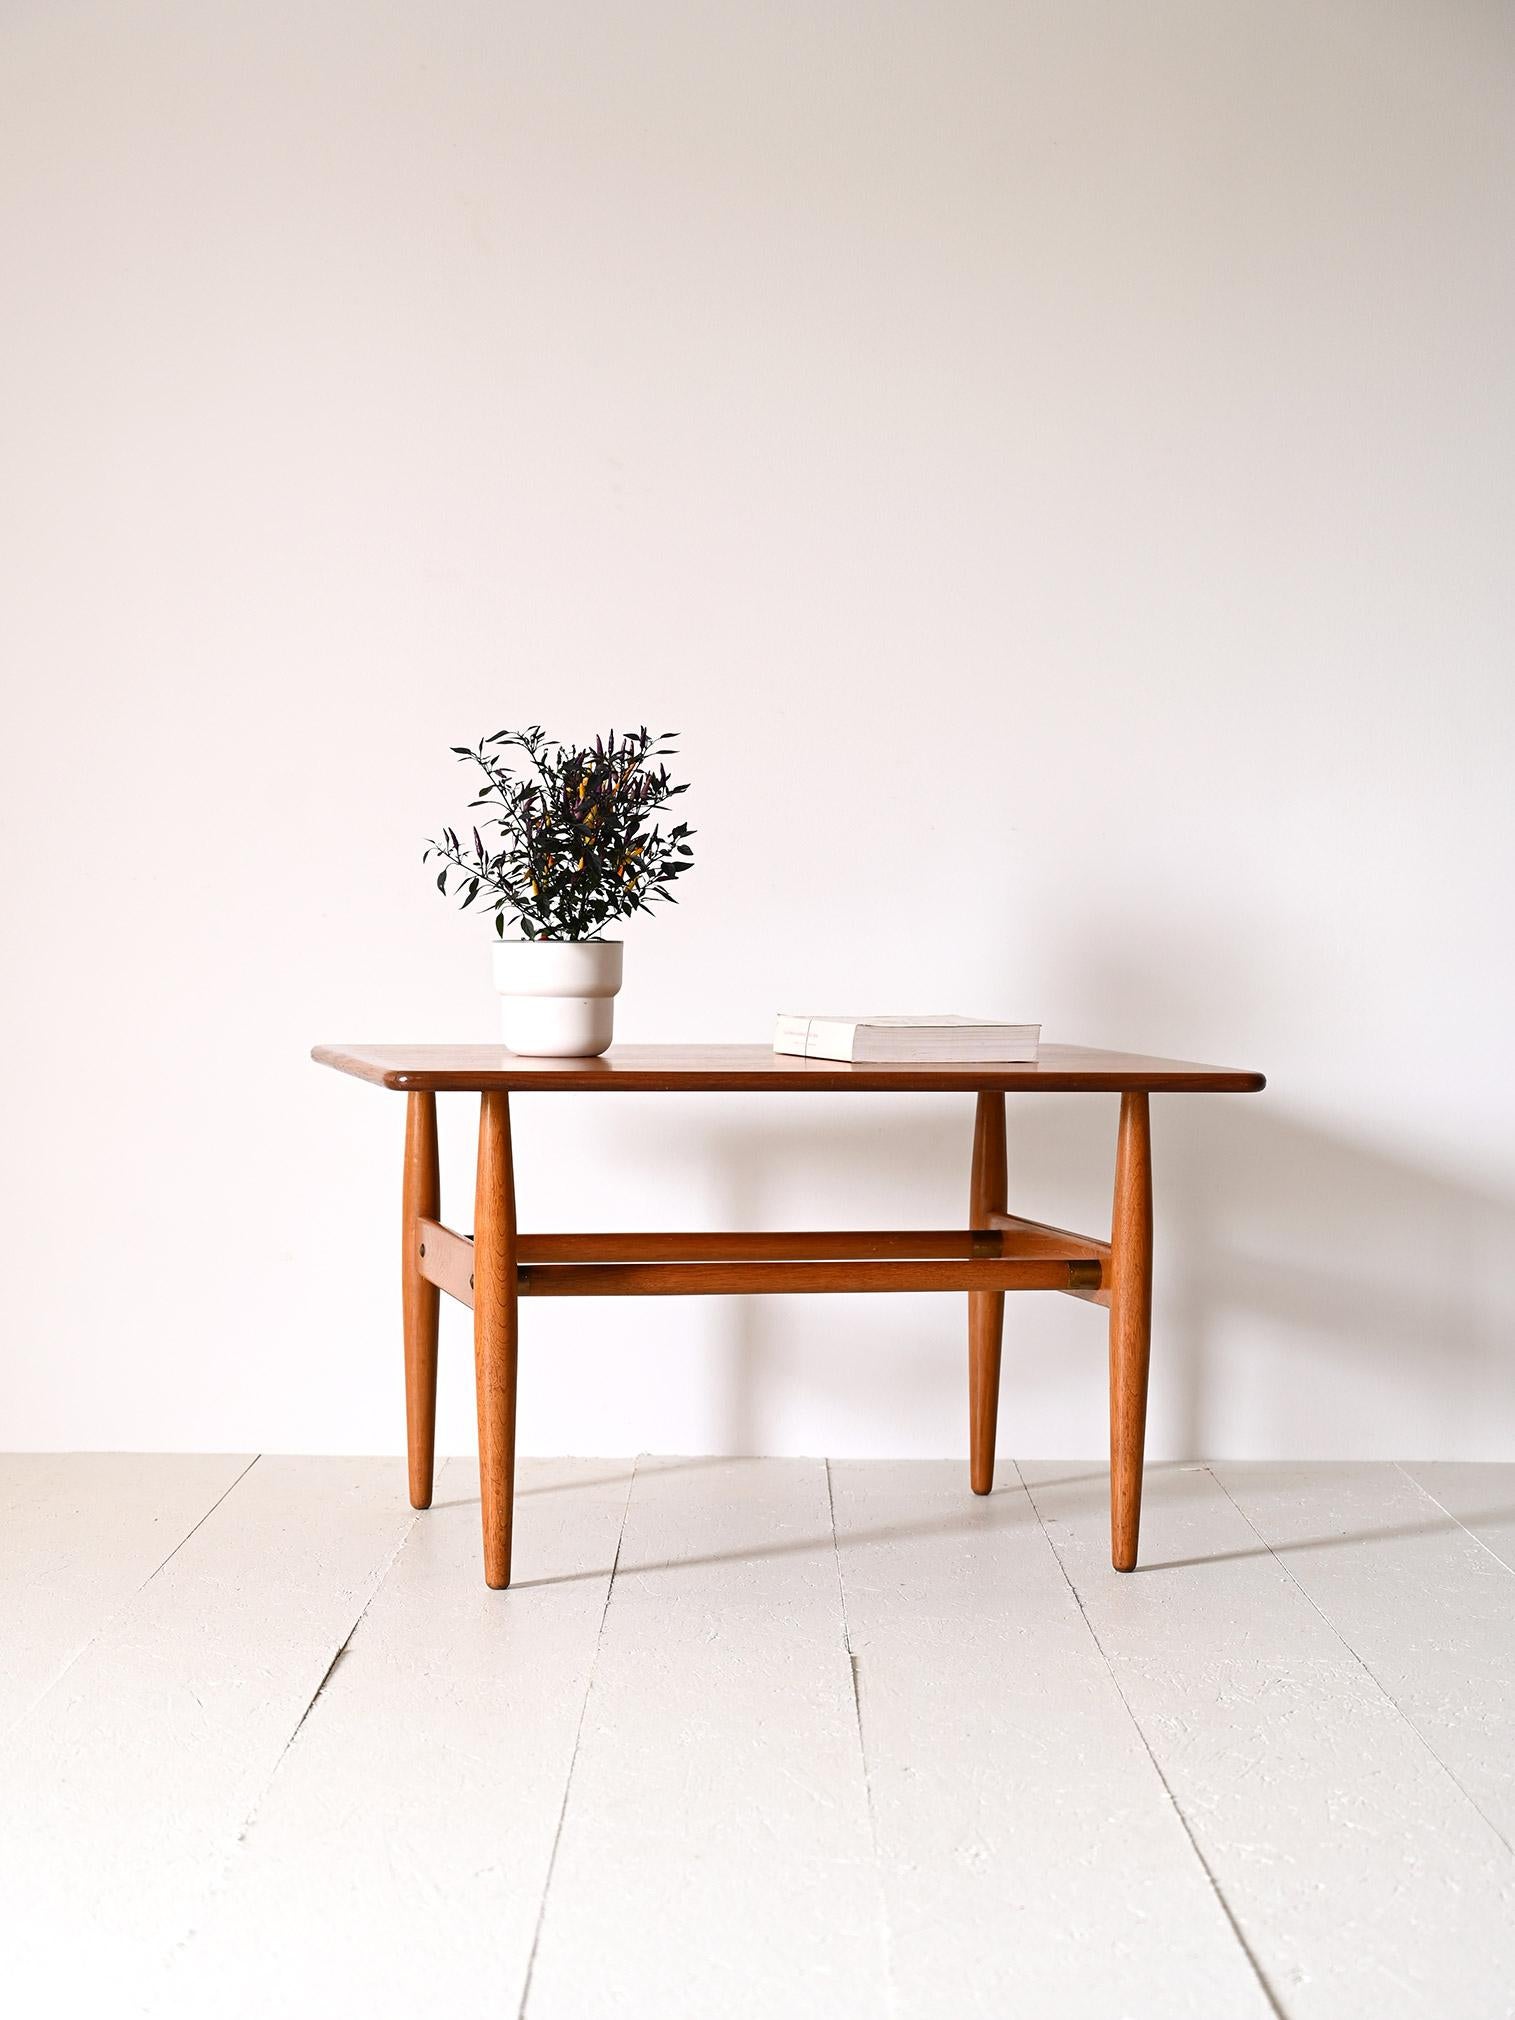 Vintage 1960s rectangular coffee table.

An original Scandinavian piece of furniture with soft, minimal lines. Consisting of the top with rounded corners and conical legs as well as the two central bars that serve as magazine racks.
The warm shade